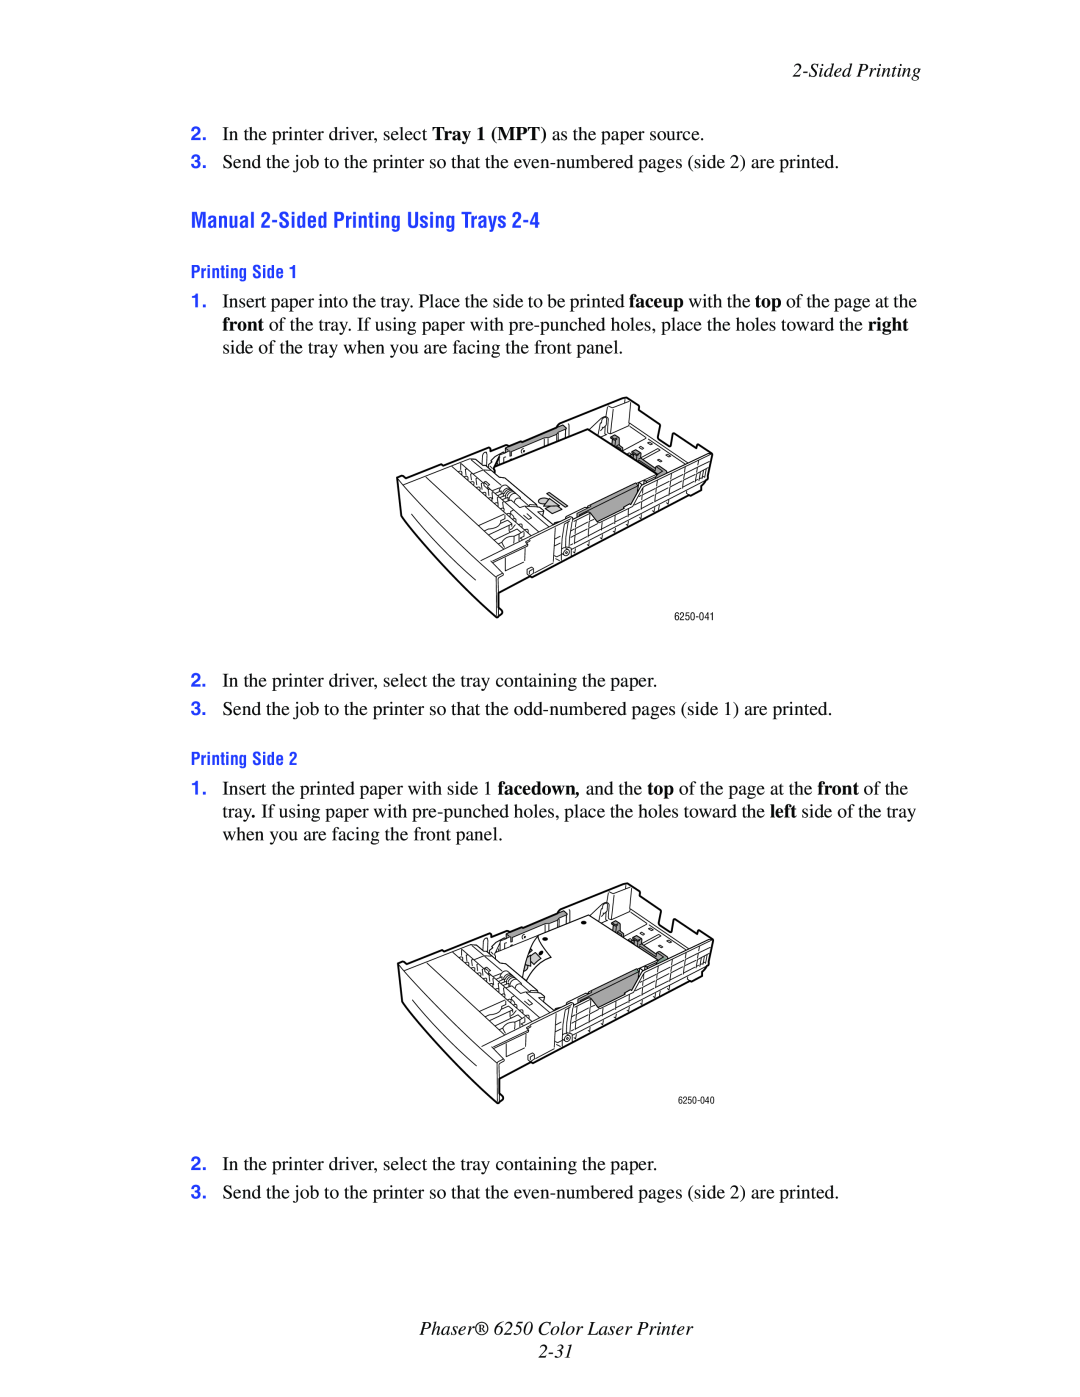 Xerox manual Manual 2-Sided Printing Using Trays, Phaser 6250 Color Laser Printer 2-31 